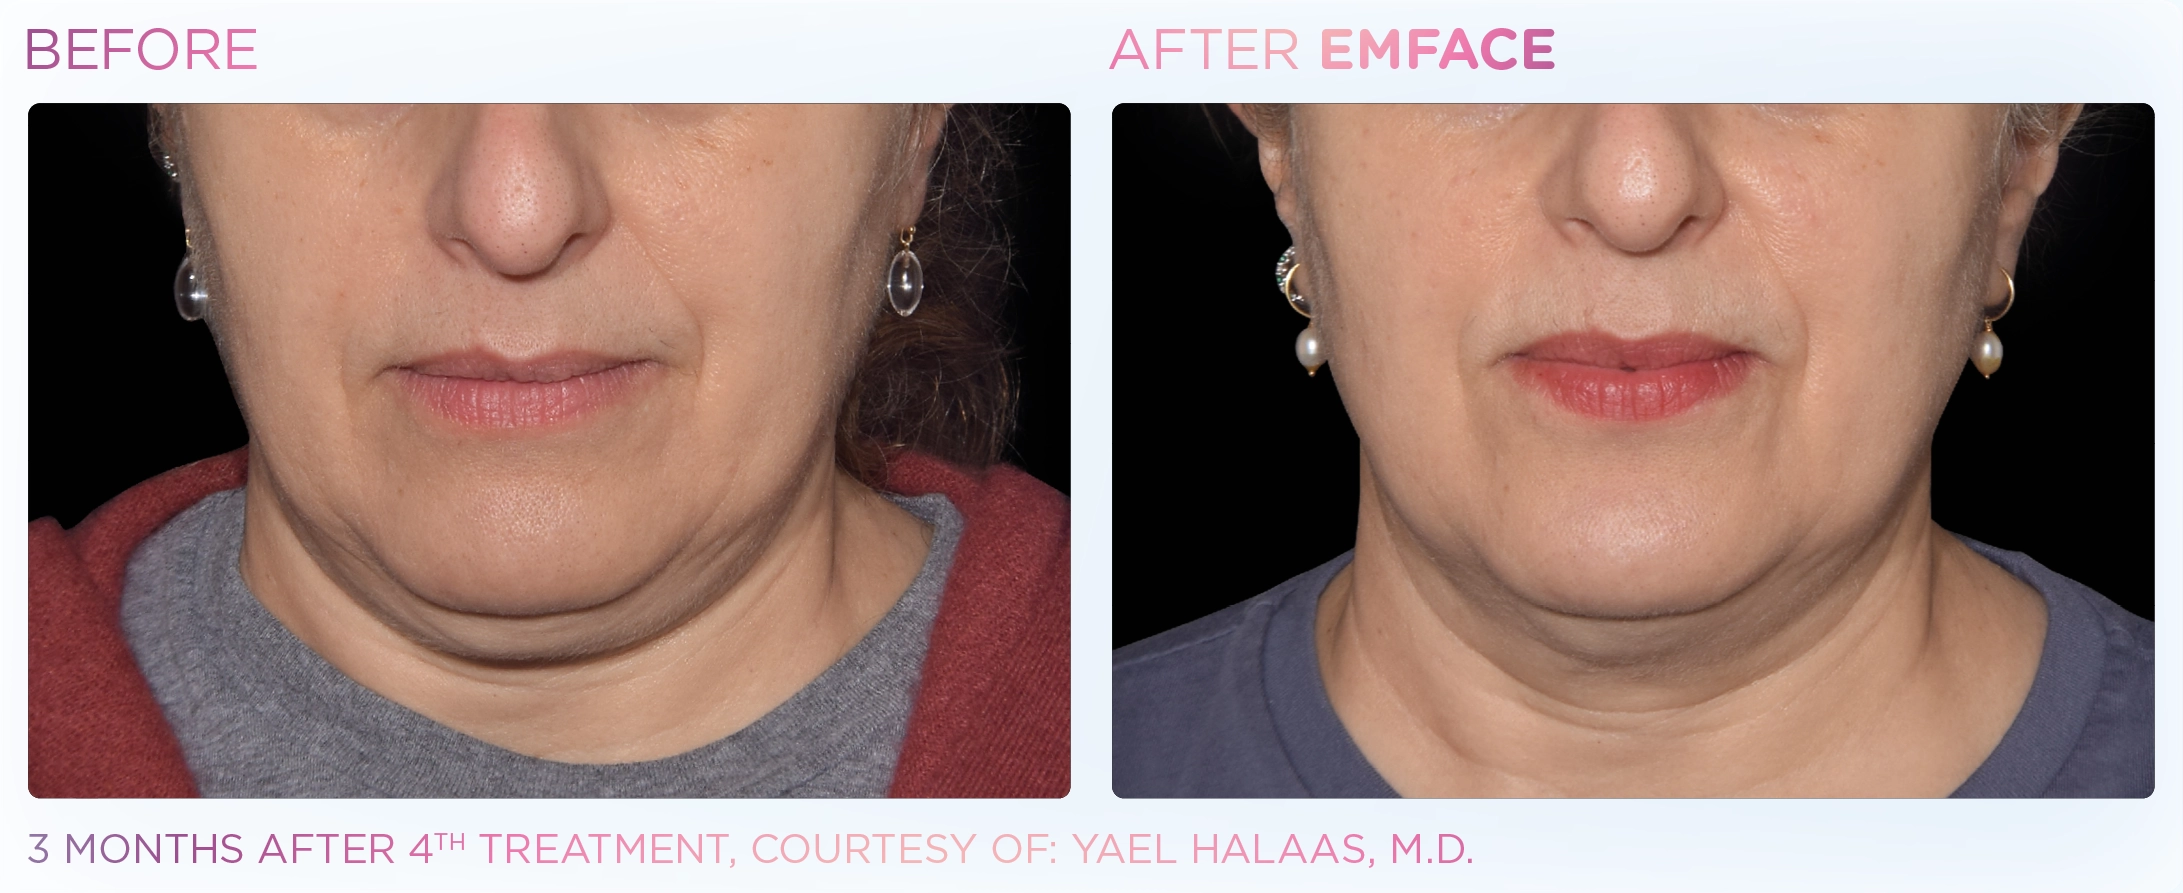 EMFACE Before & After | Image Gallery | Neo Body Med Spa